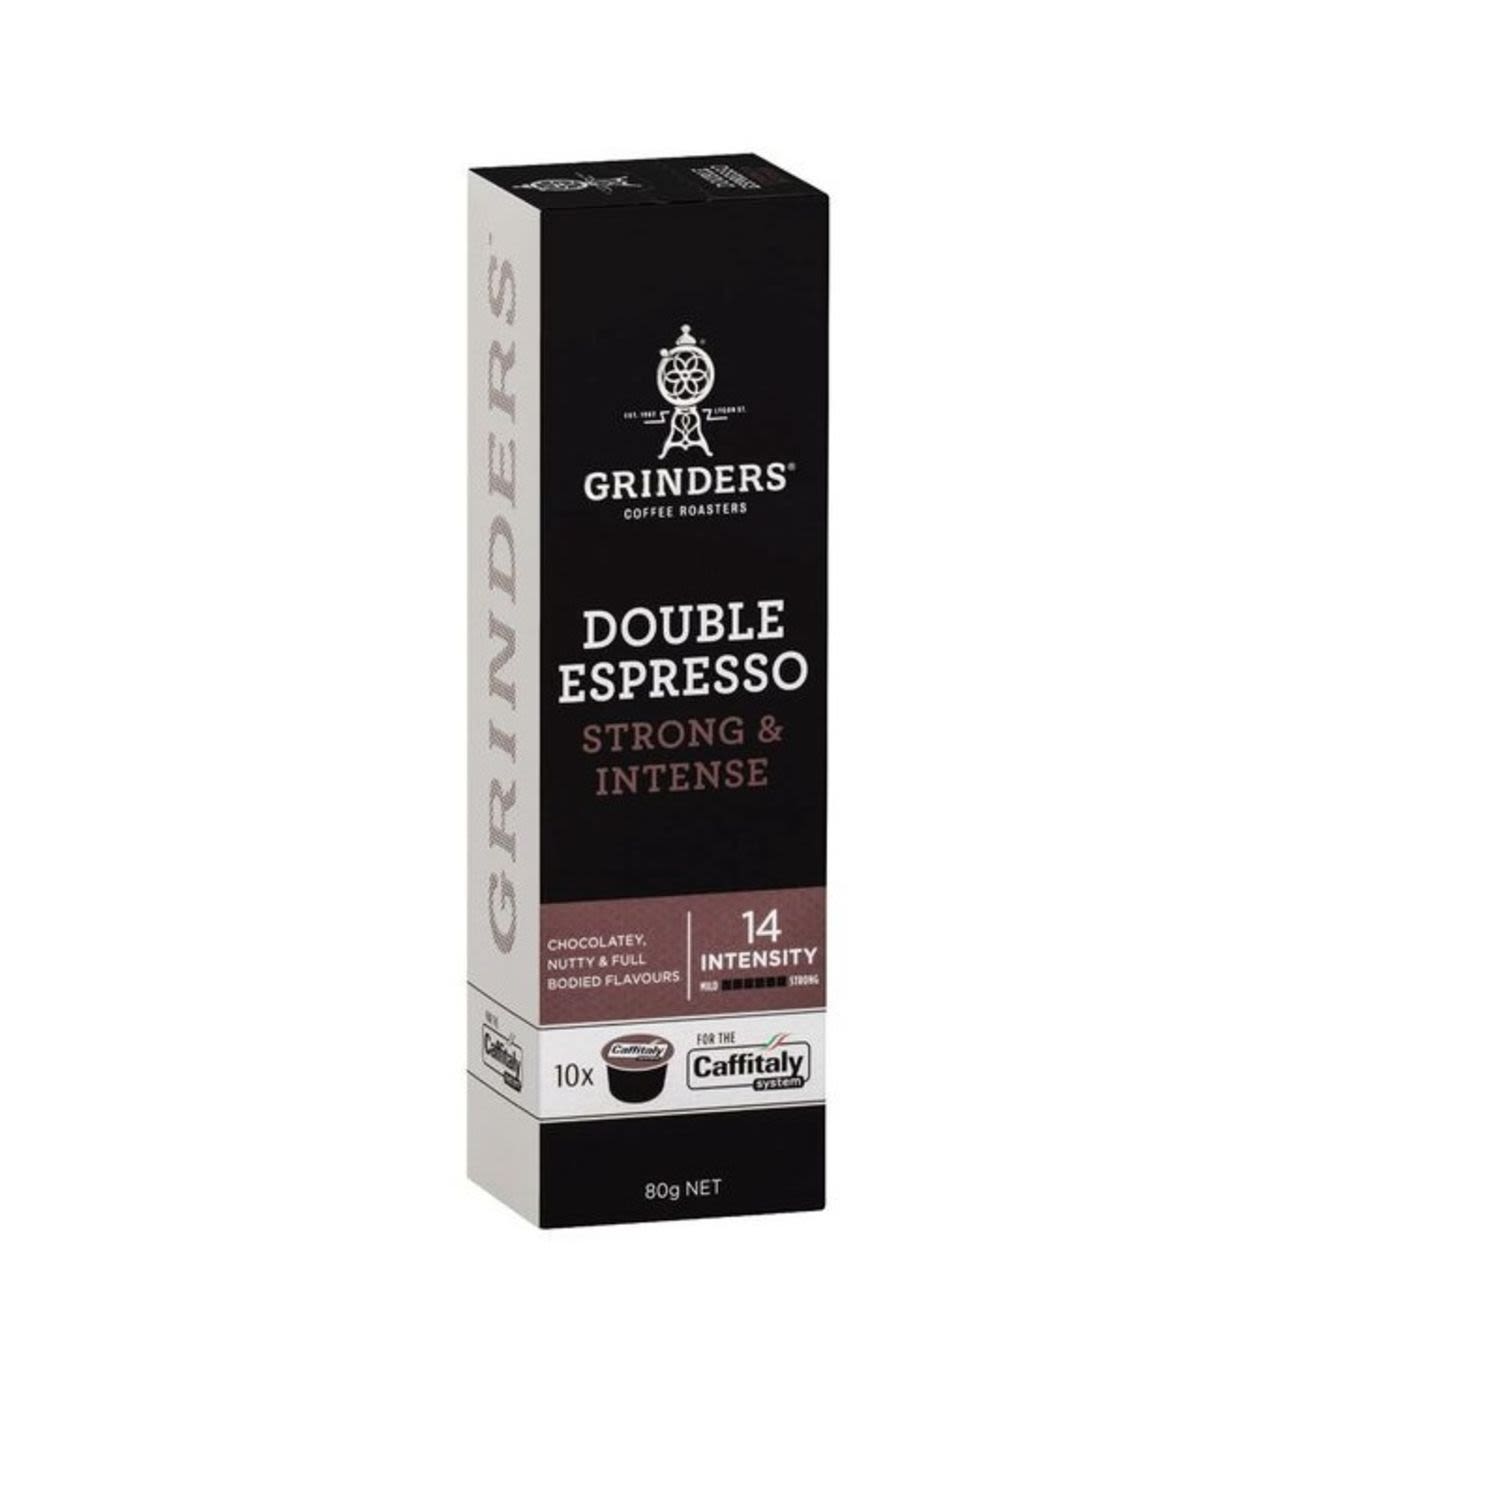 Grinders Double Espresso Coffee Capsules, 10 Each